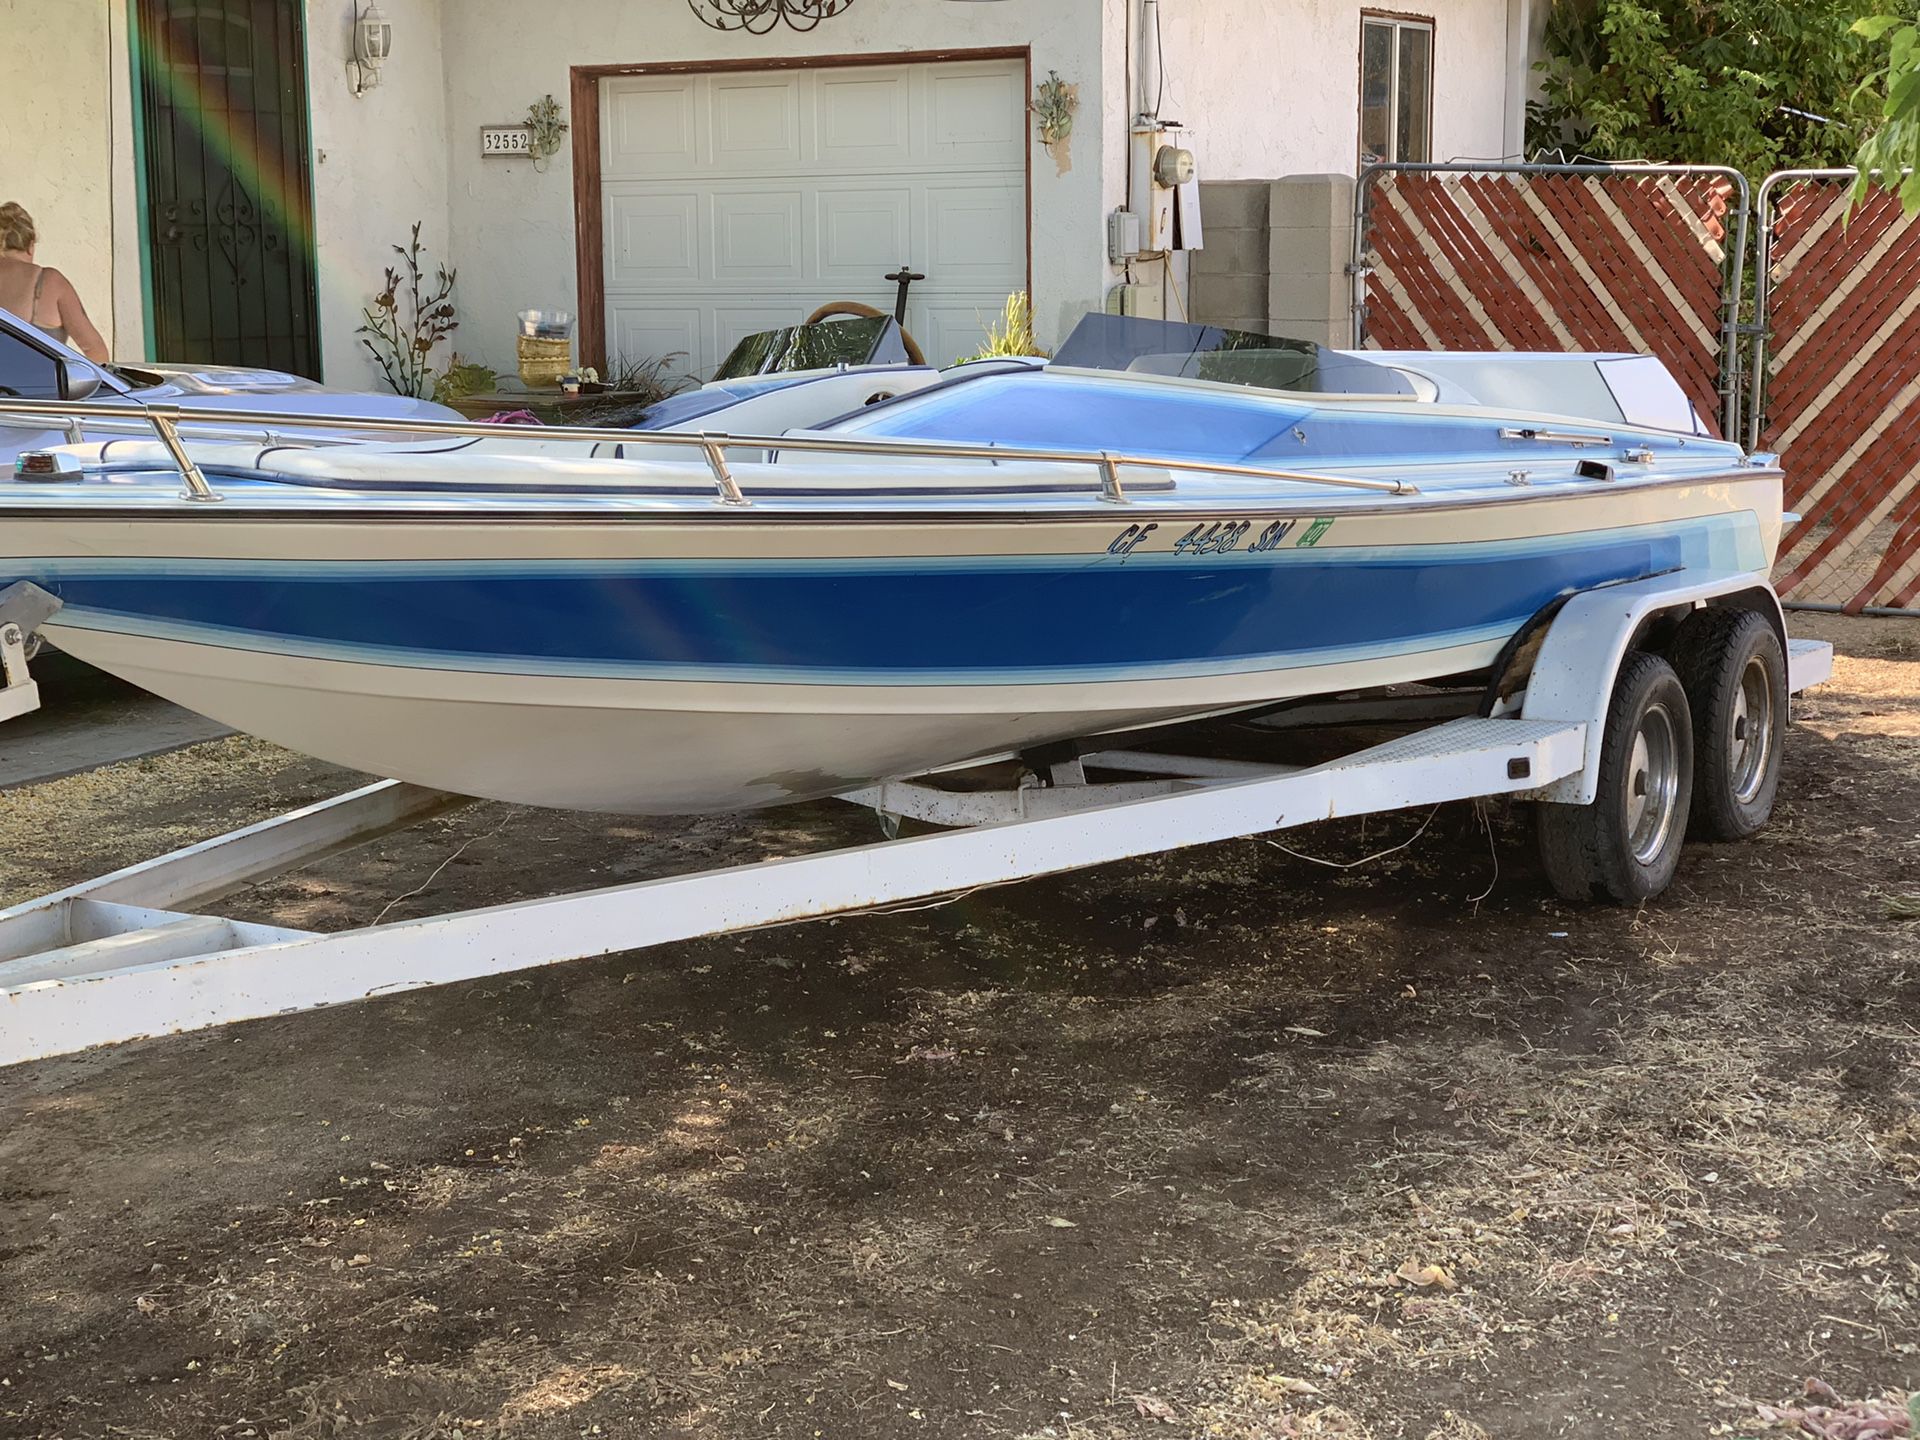 I/o Open bow boat day cruiserChevy 350 Volvo 280 outdrive trailer stainless steel prop ready to go